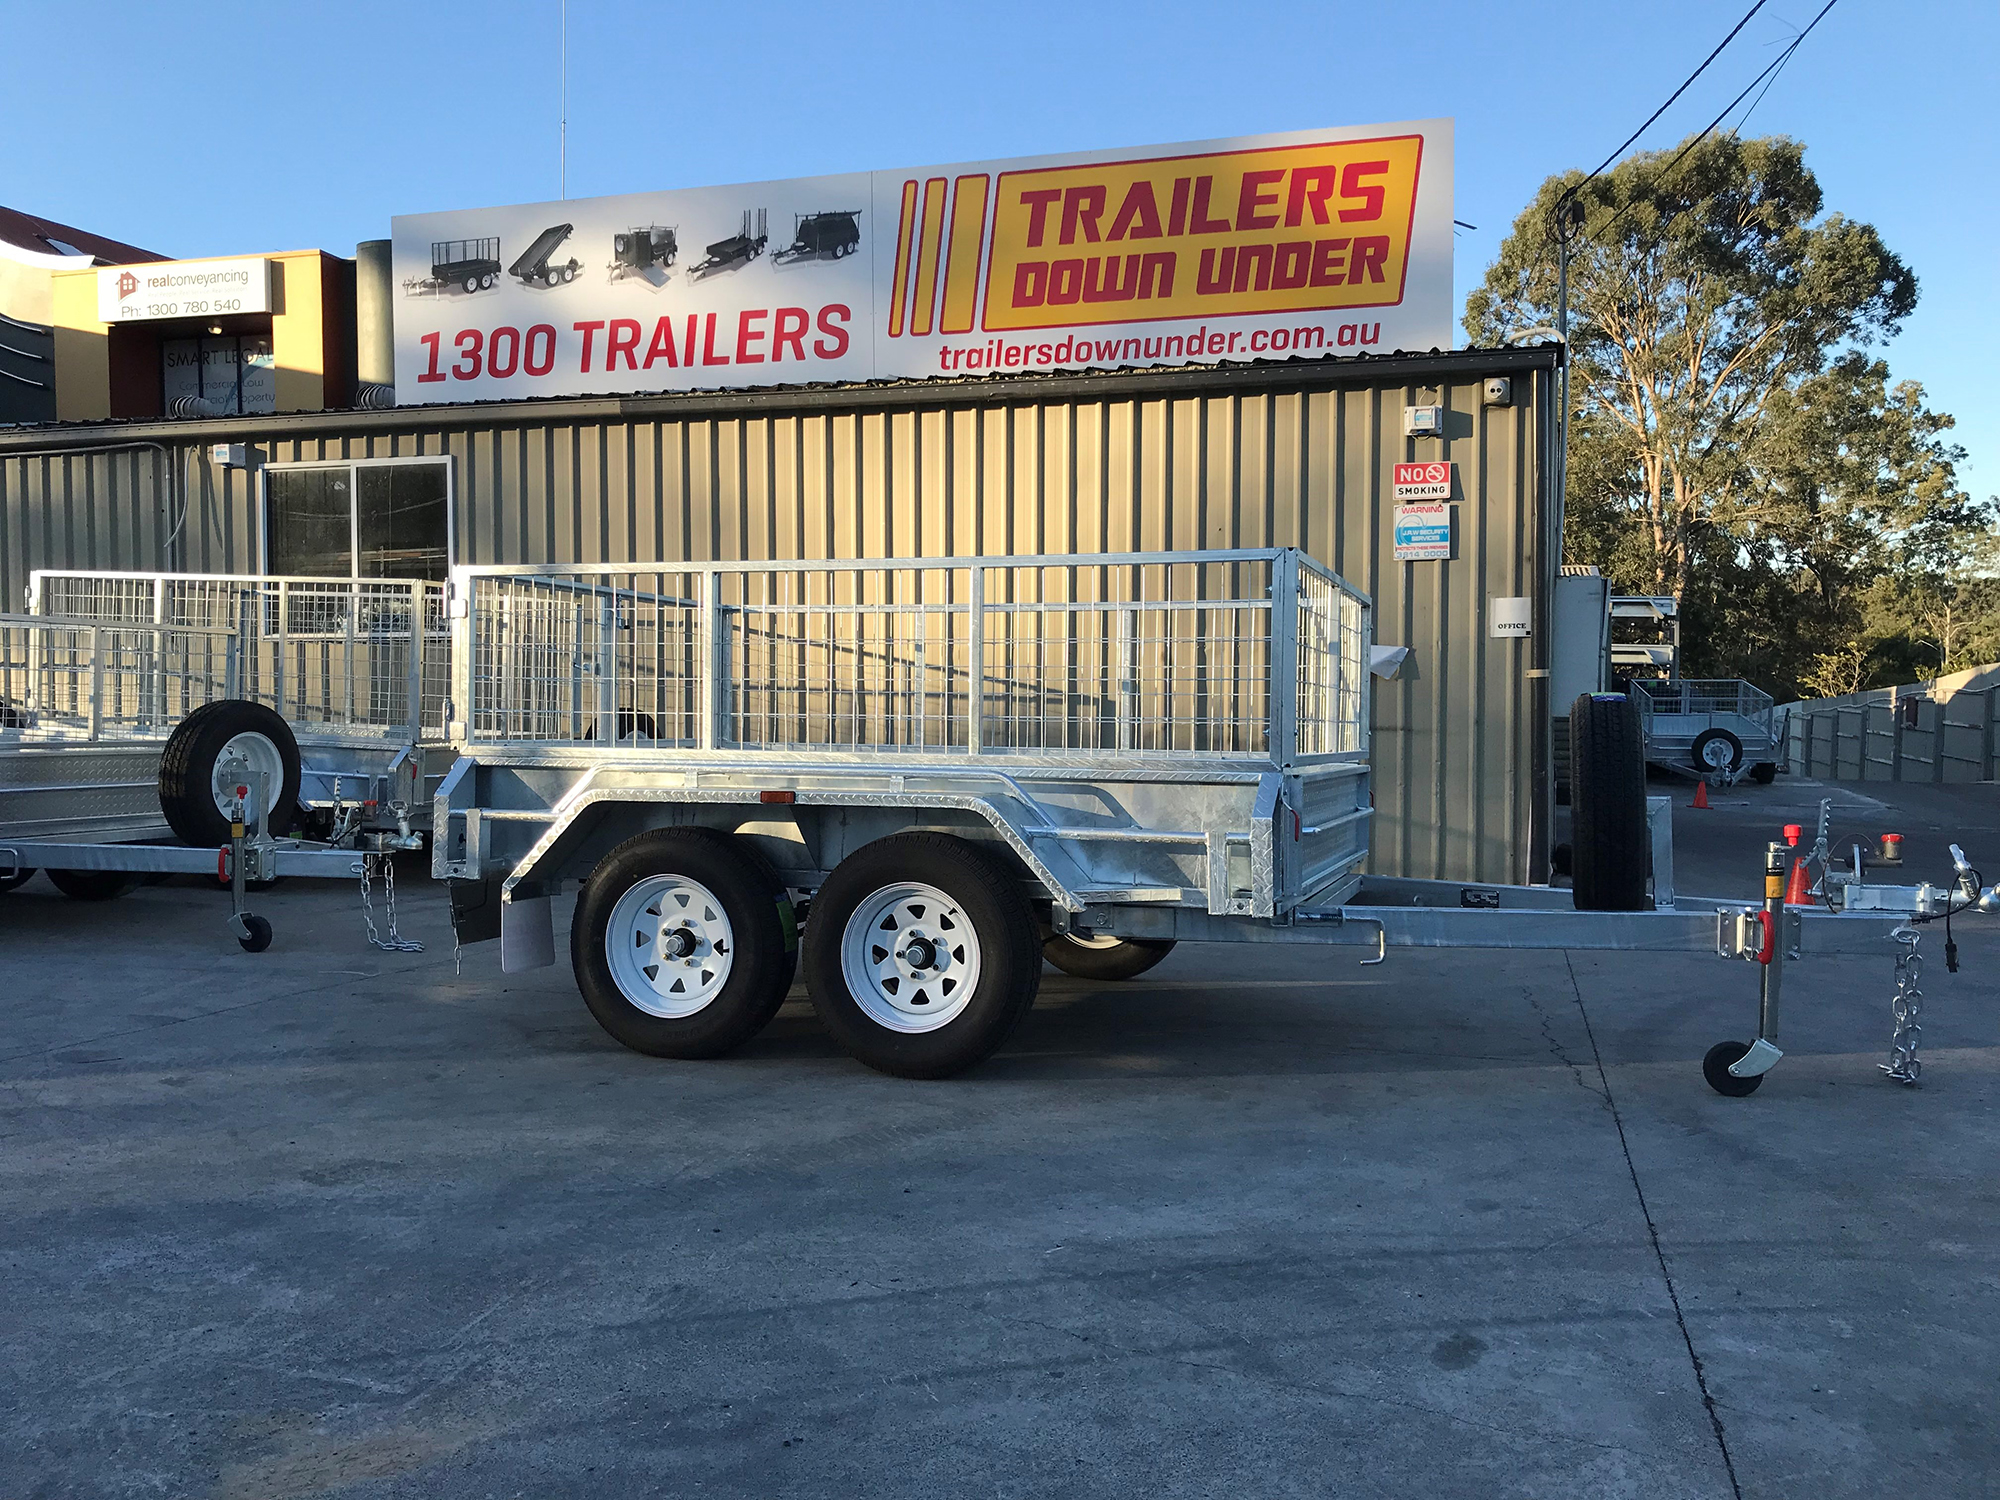 Heavy Duty Galvanised Cage Trailer for Sale Brisbane